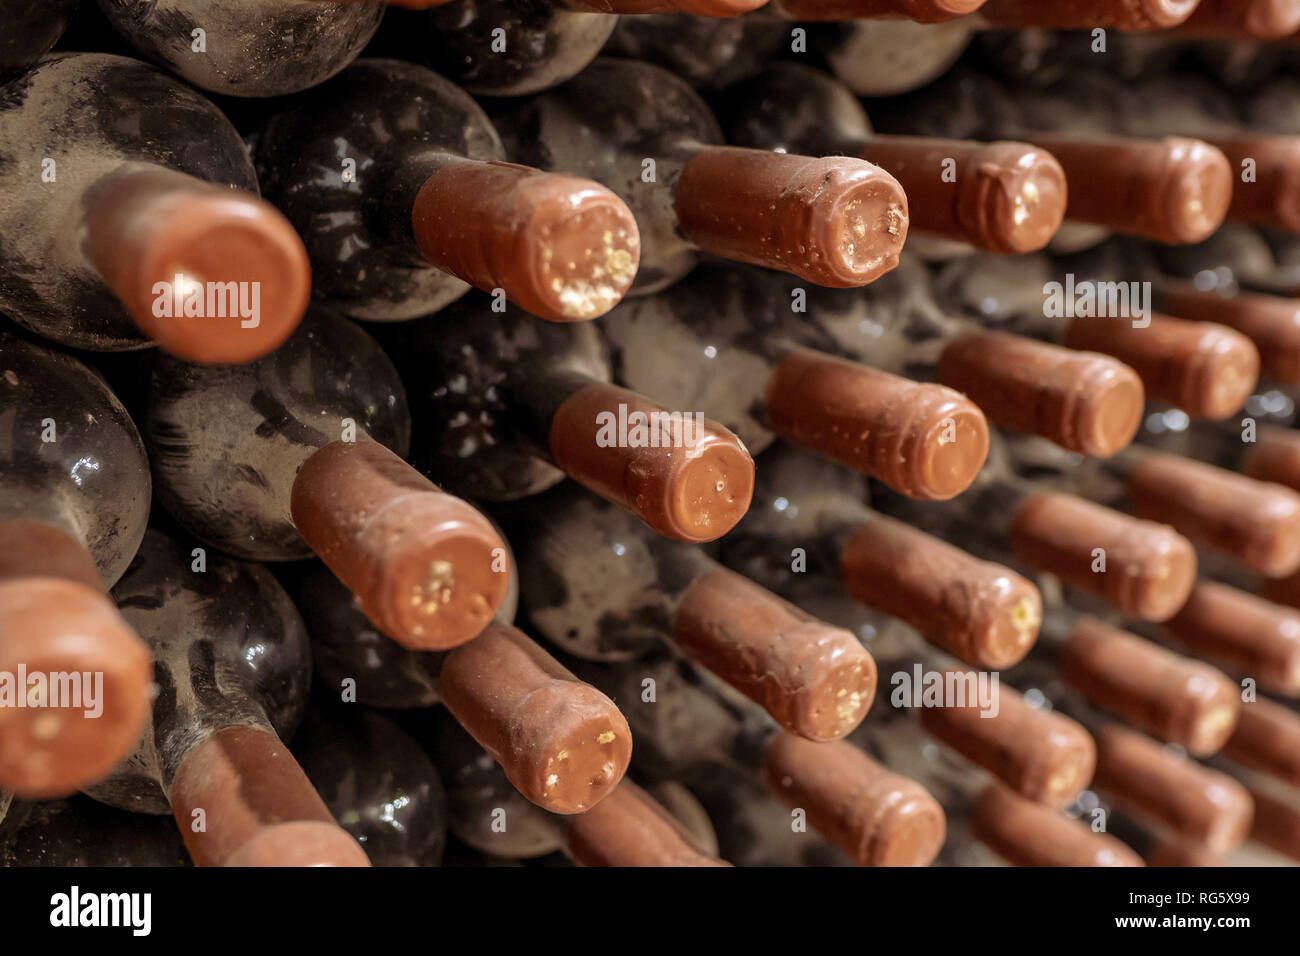 Dusty old wine bottles aging in a winery Stock Photo